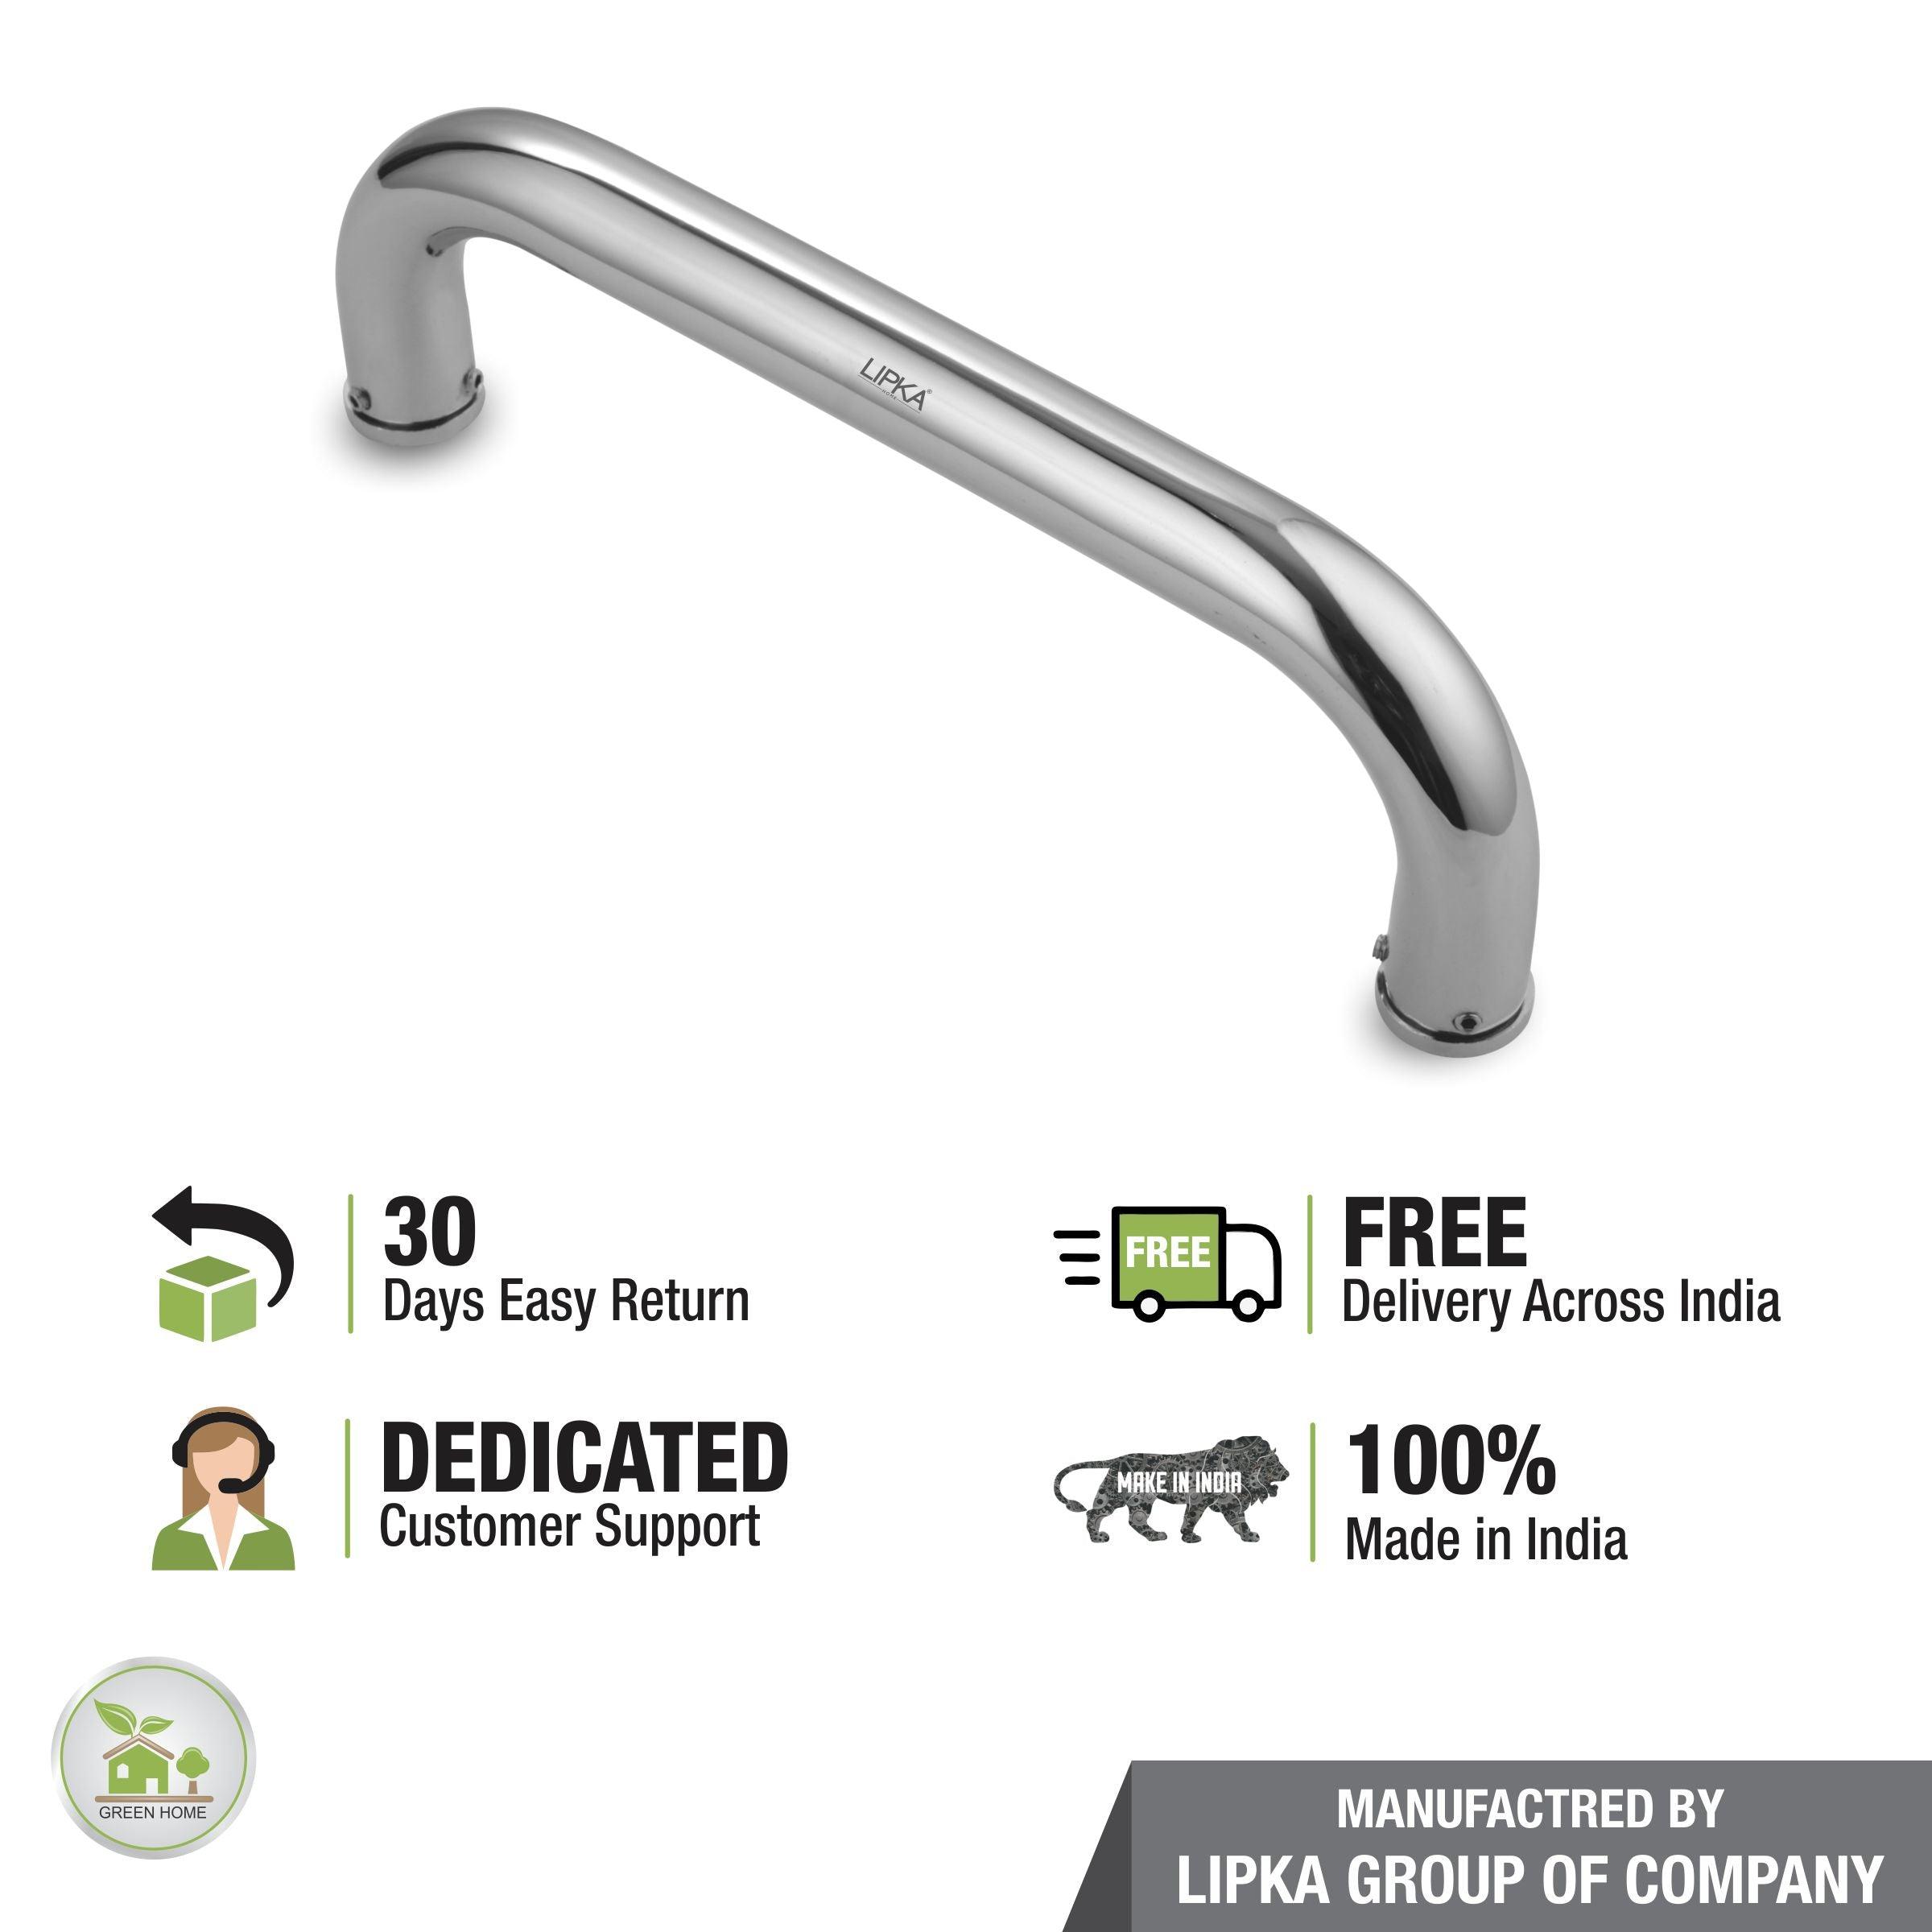 Brass Grab Bar (24 Inches) free delivery